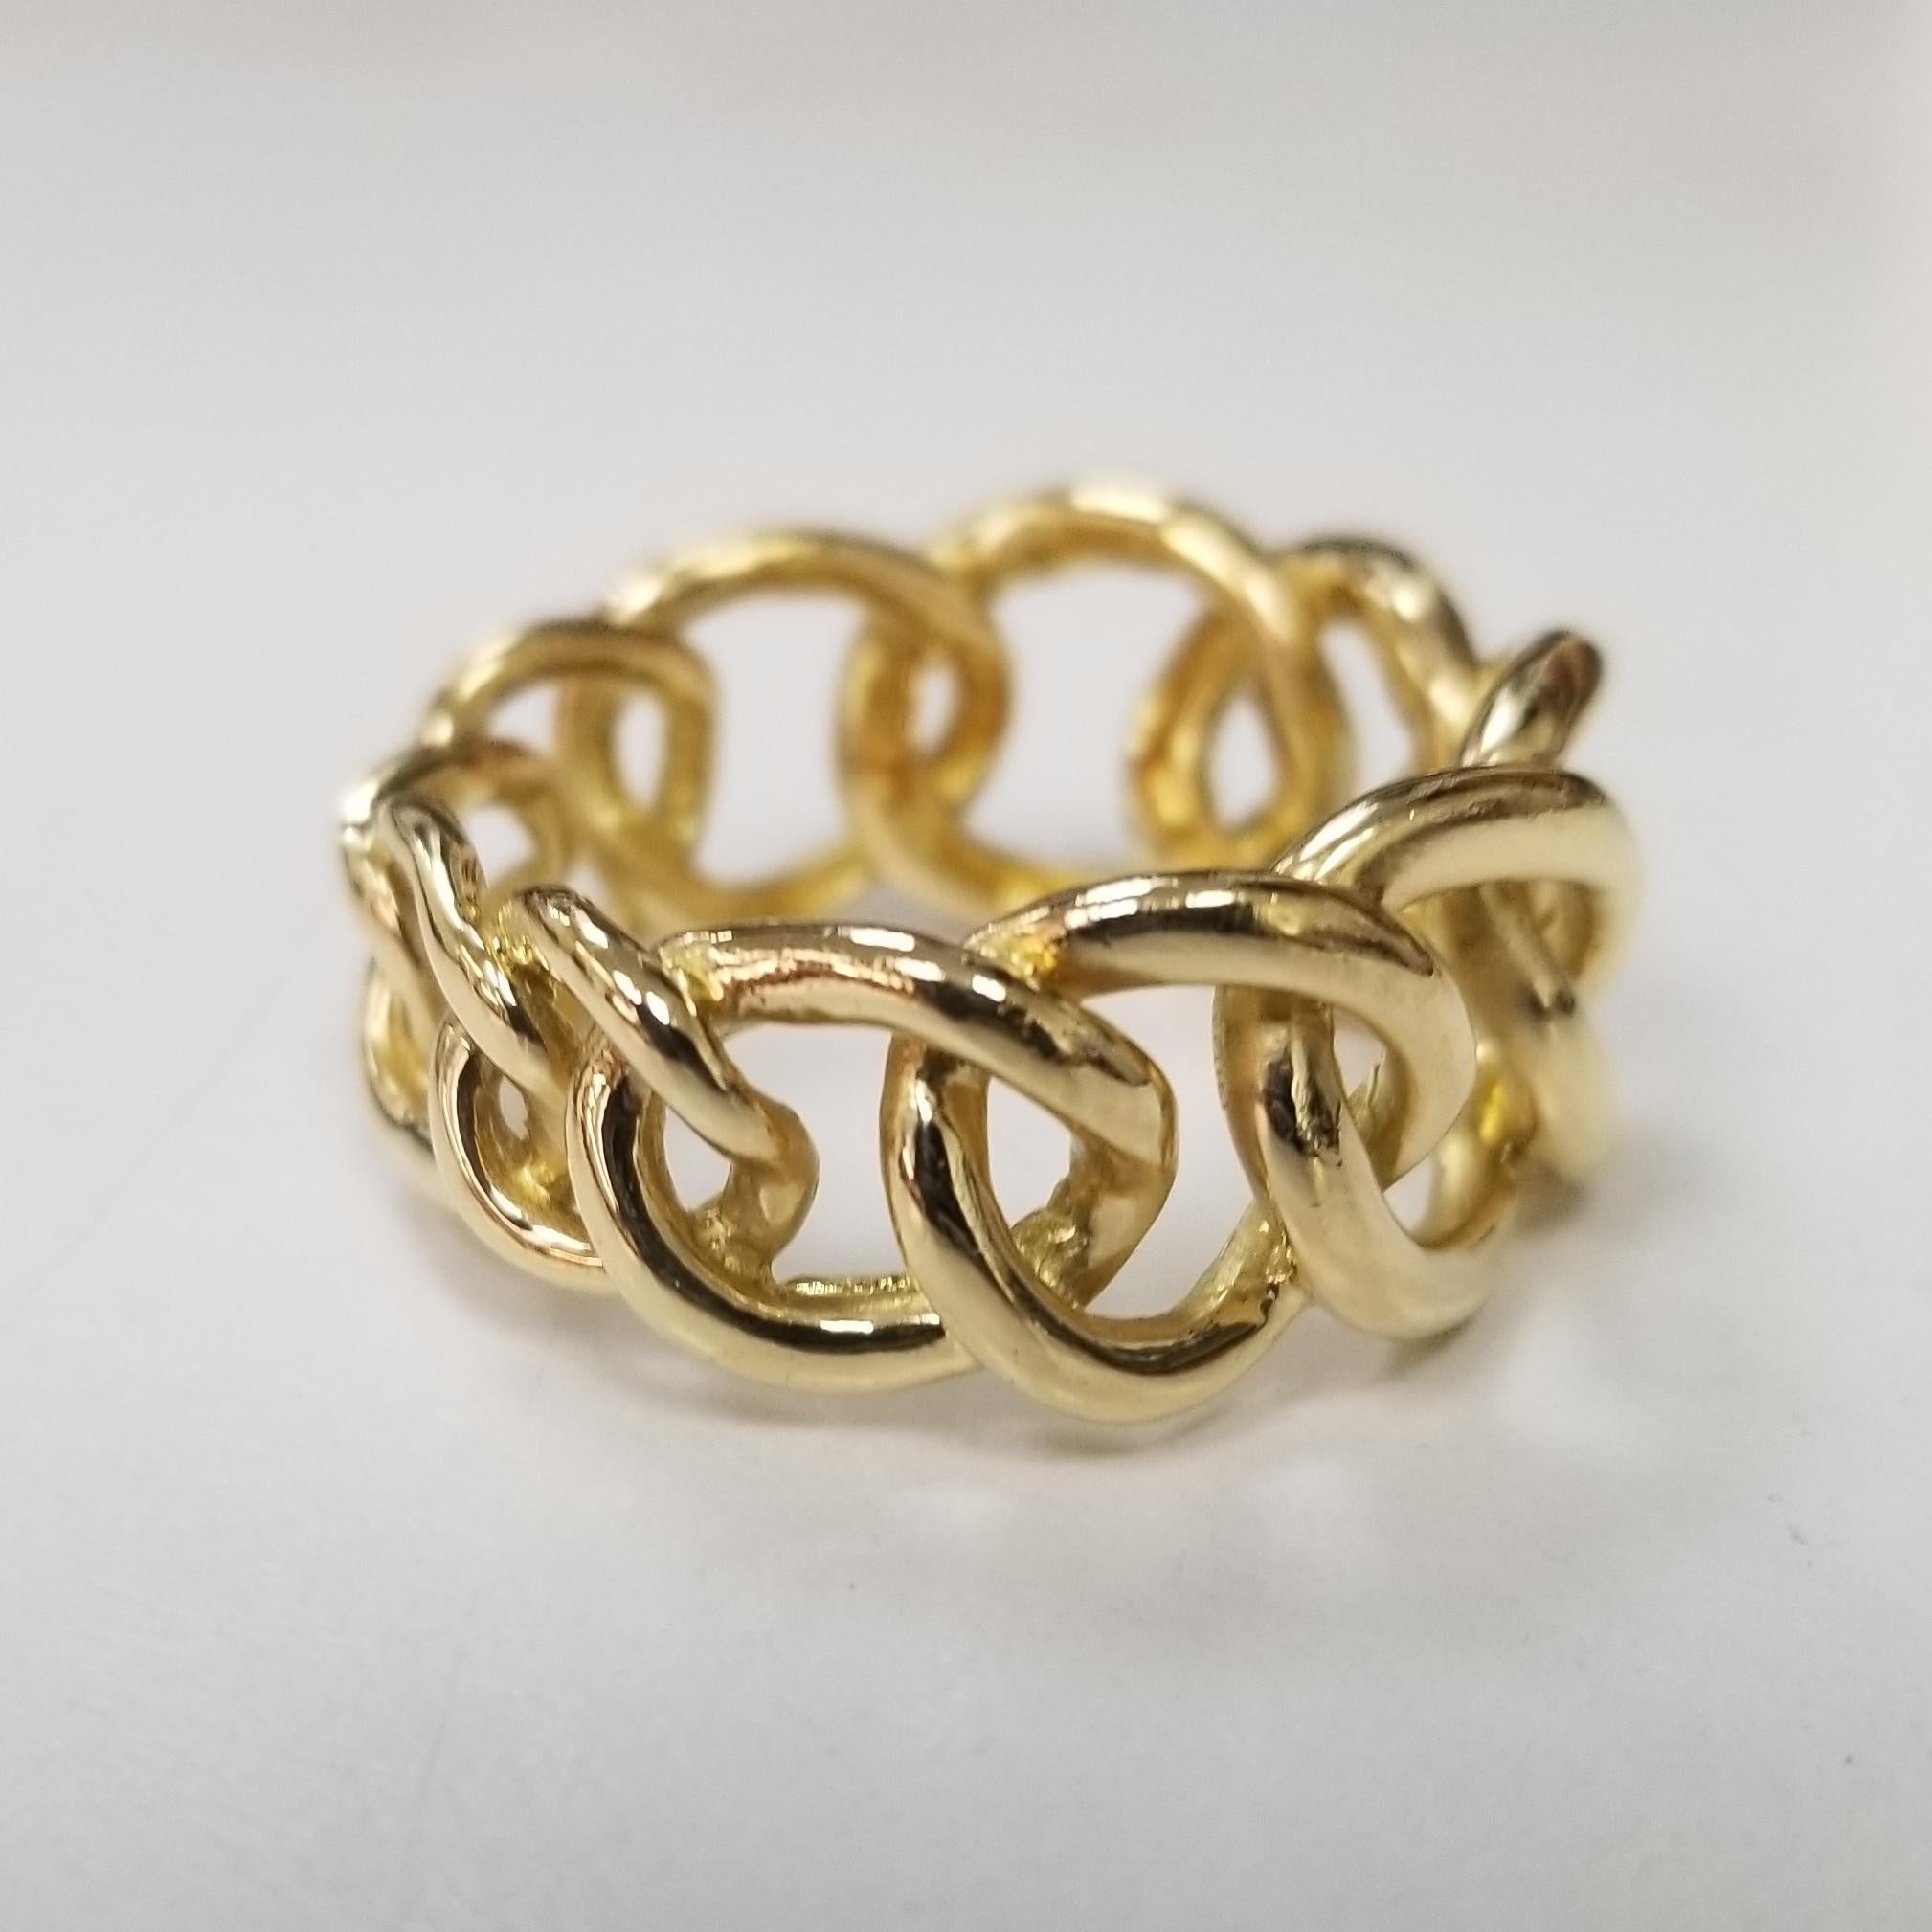 Classic 18 karat yellow gold sculptural graduating circle ring on any finger! The innovative design by Angela Cummings,  polished finishes on the link motif band, reflects the beauty that she finds in the three-dimensional art of sculpture. Size 11